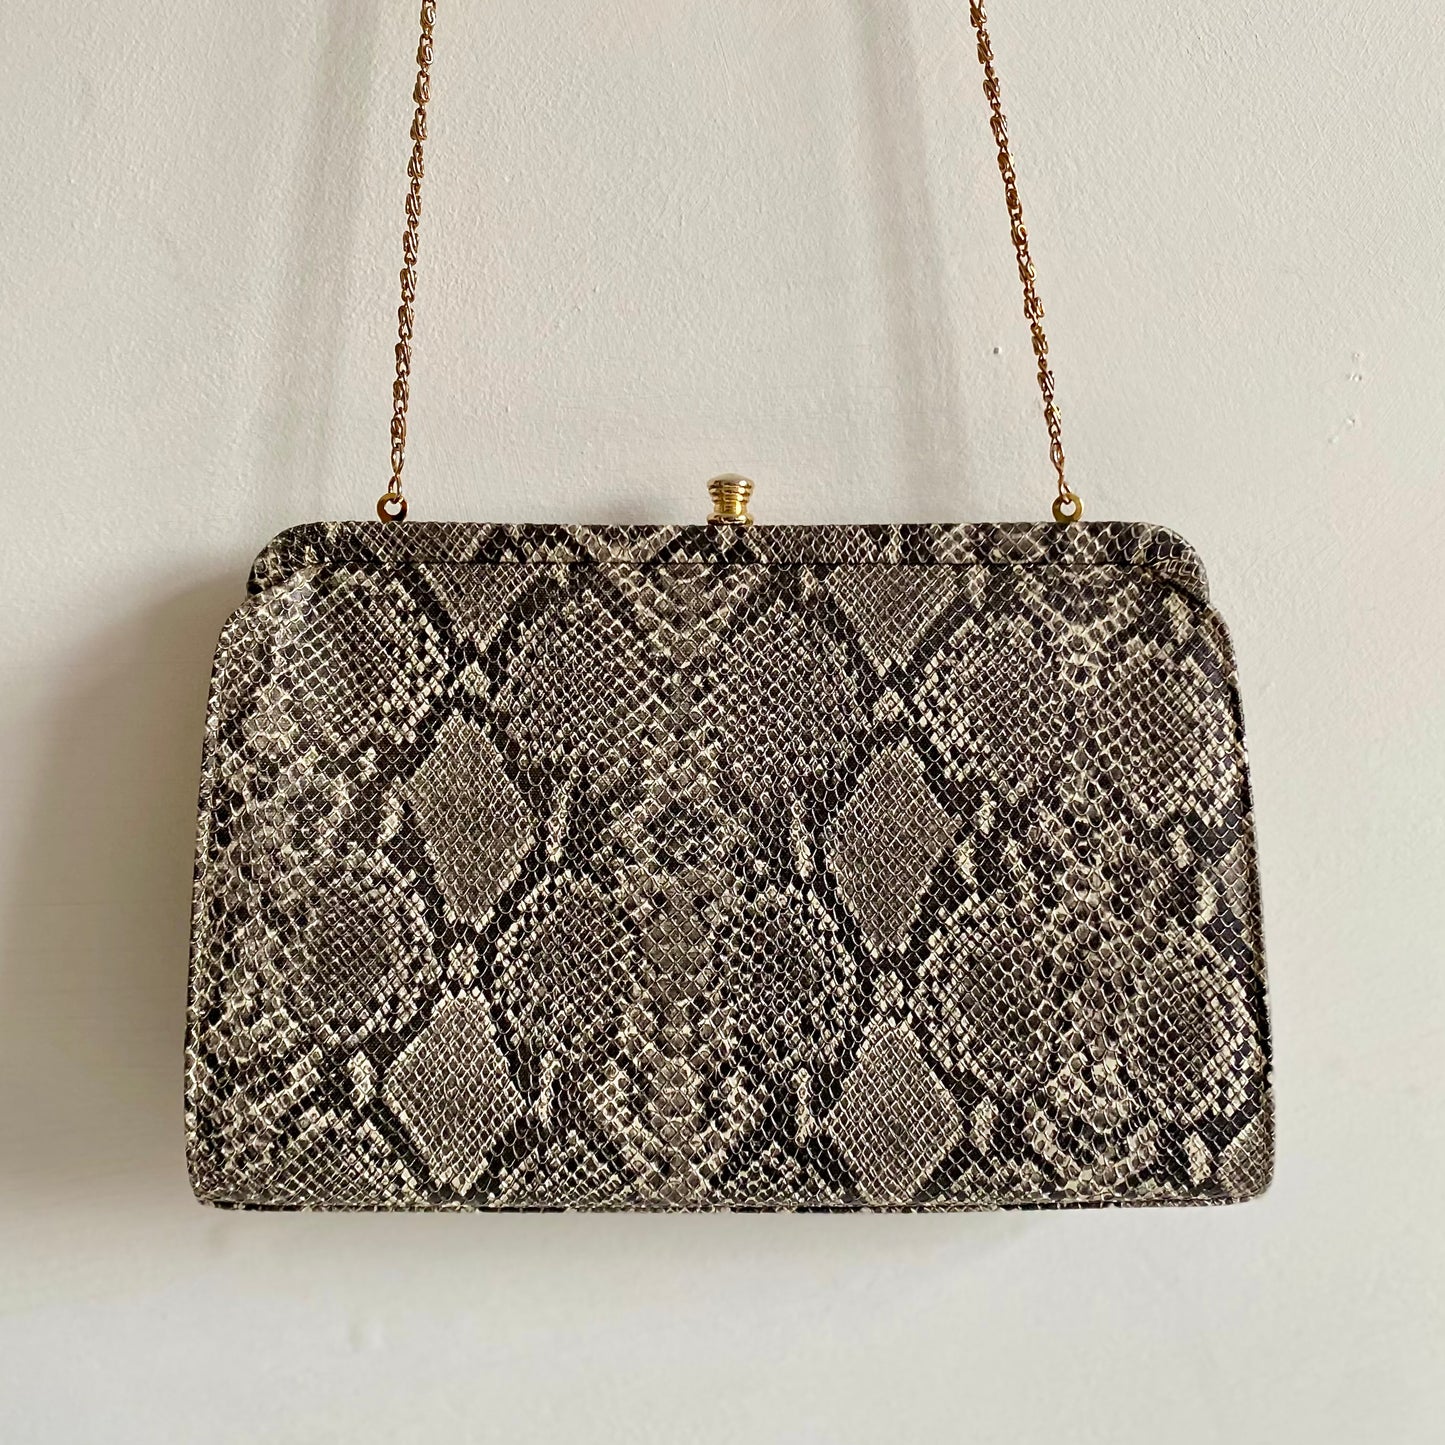 Vintage 80s snakeskin print bag By Japelle Jane Shilton Top clasp closure Fabric lined with internal zip pocket Chain strap (47" length) Wear as shoulder bag or as a clutch 